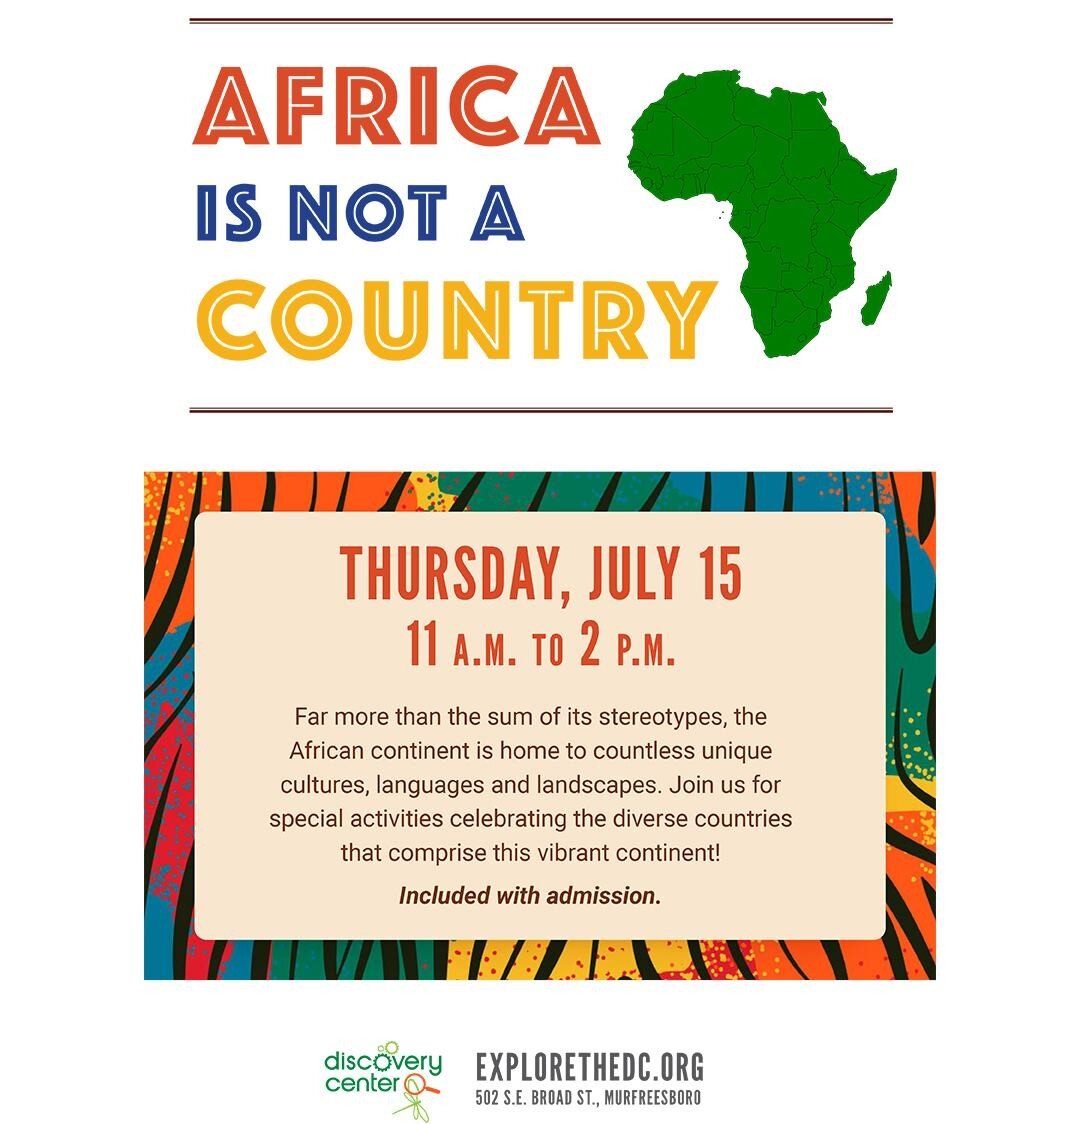 SPECIAL EVENT: Africa Is Not a Country!

Far more than the sum of its stereotypes, the African continent is home to countless unique cultures, languages and landscapes. Join us for special activities celebrating the diverse countries that comprise th